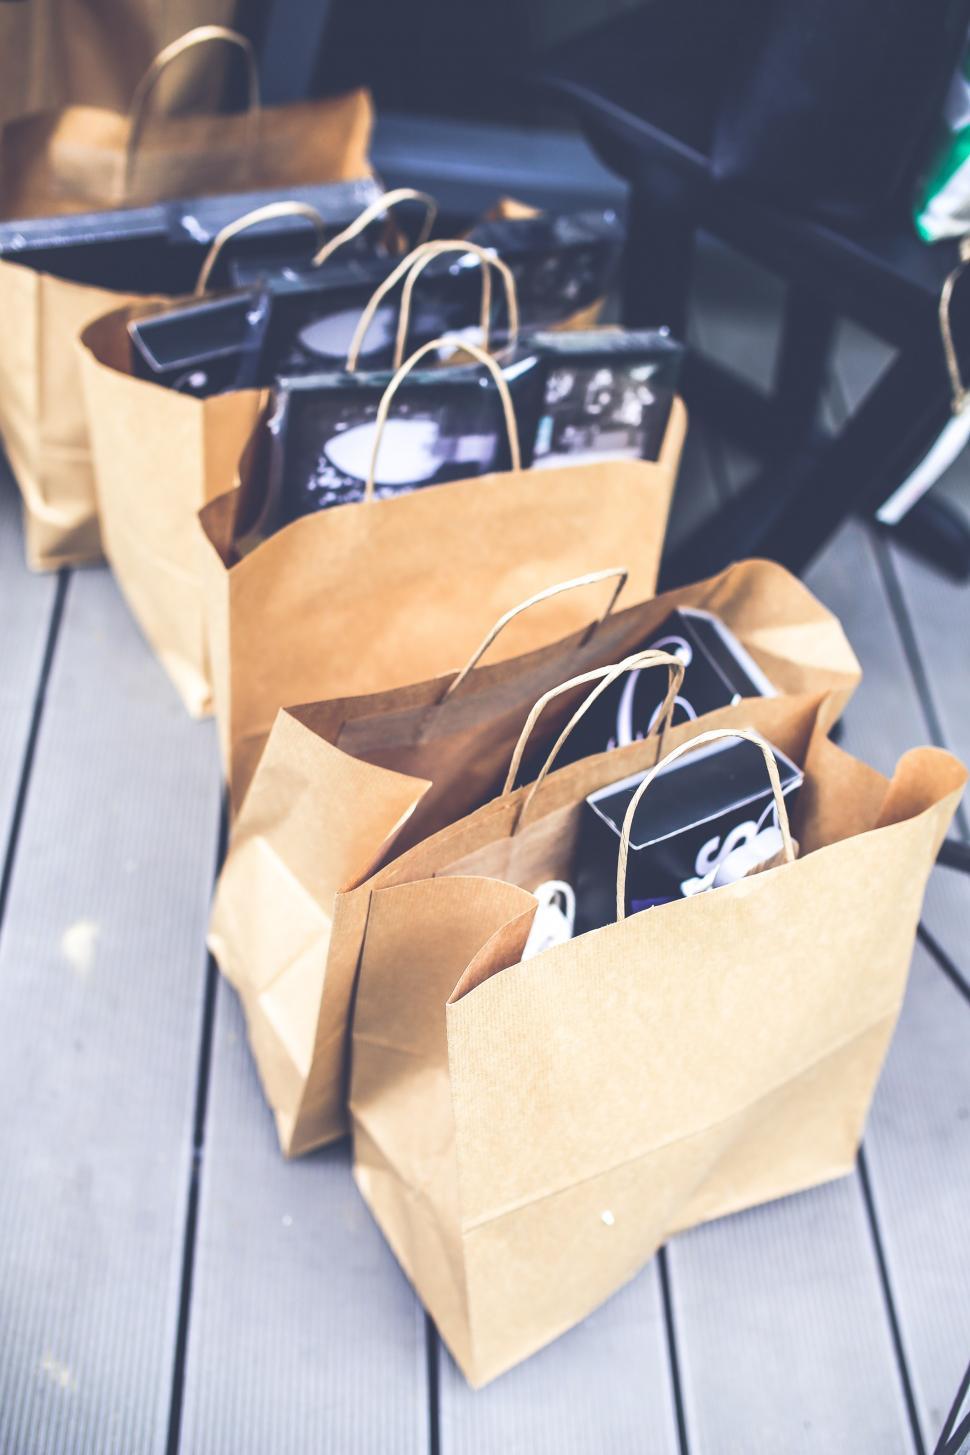 Free Image of Group of Brown Bags on Wooden Floor 